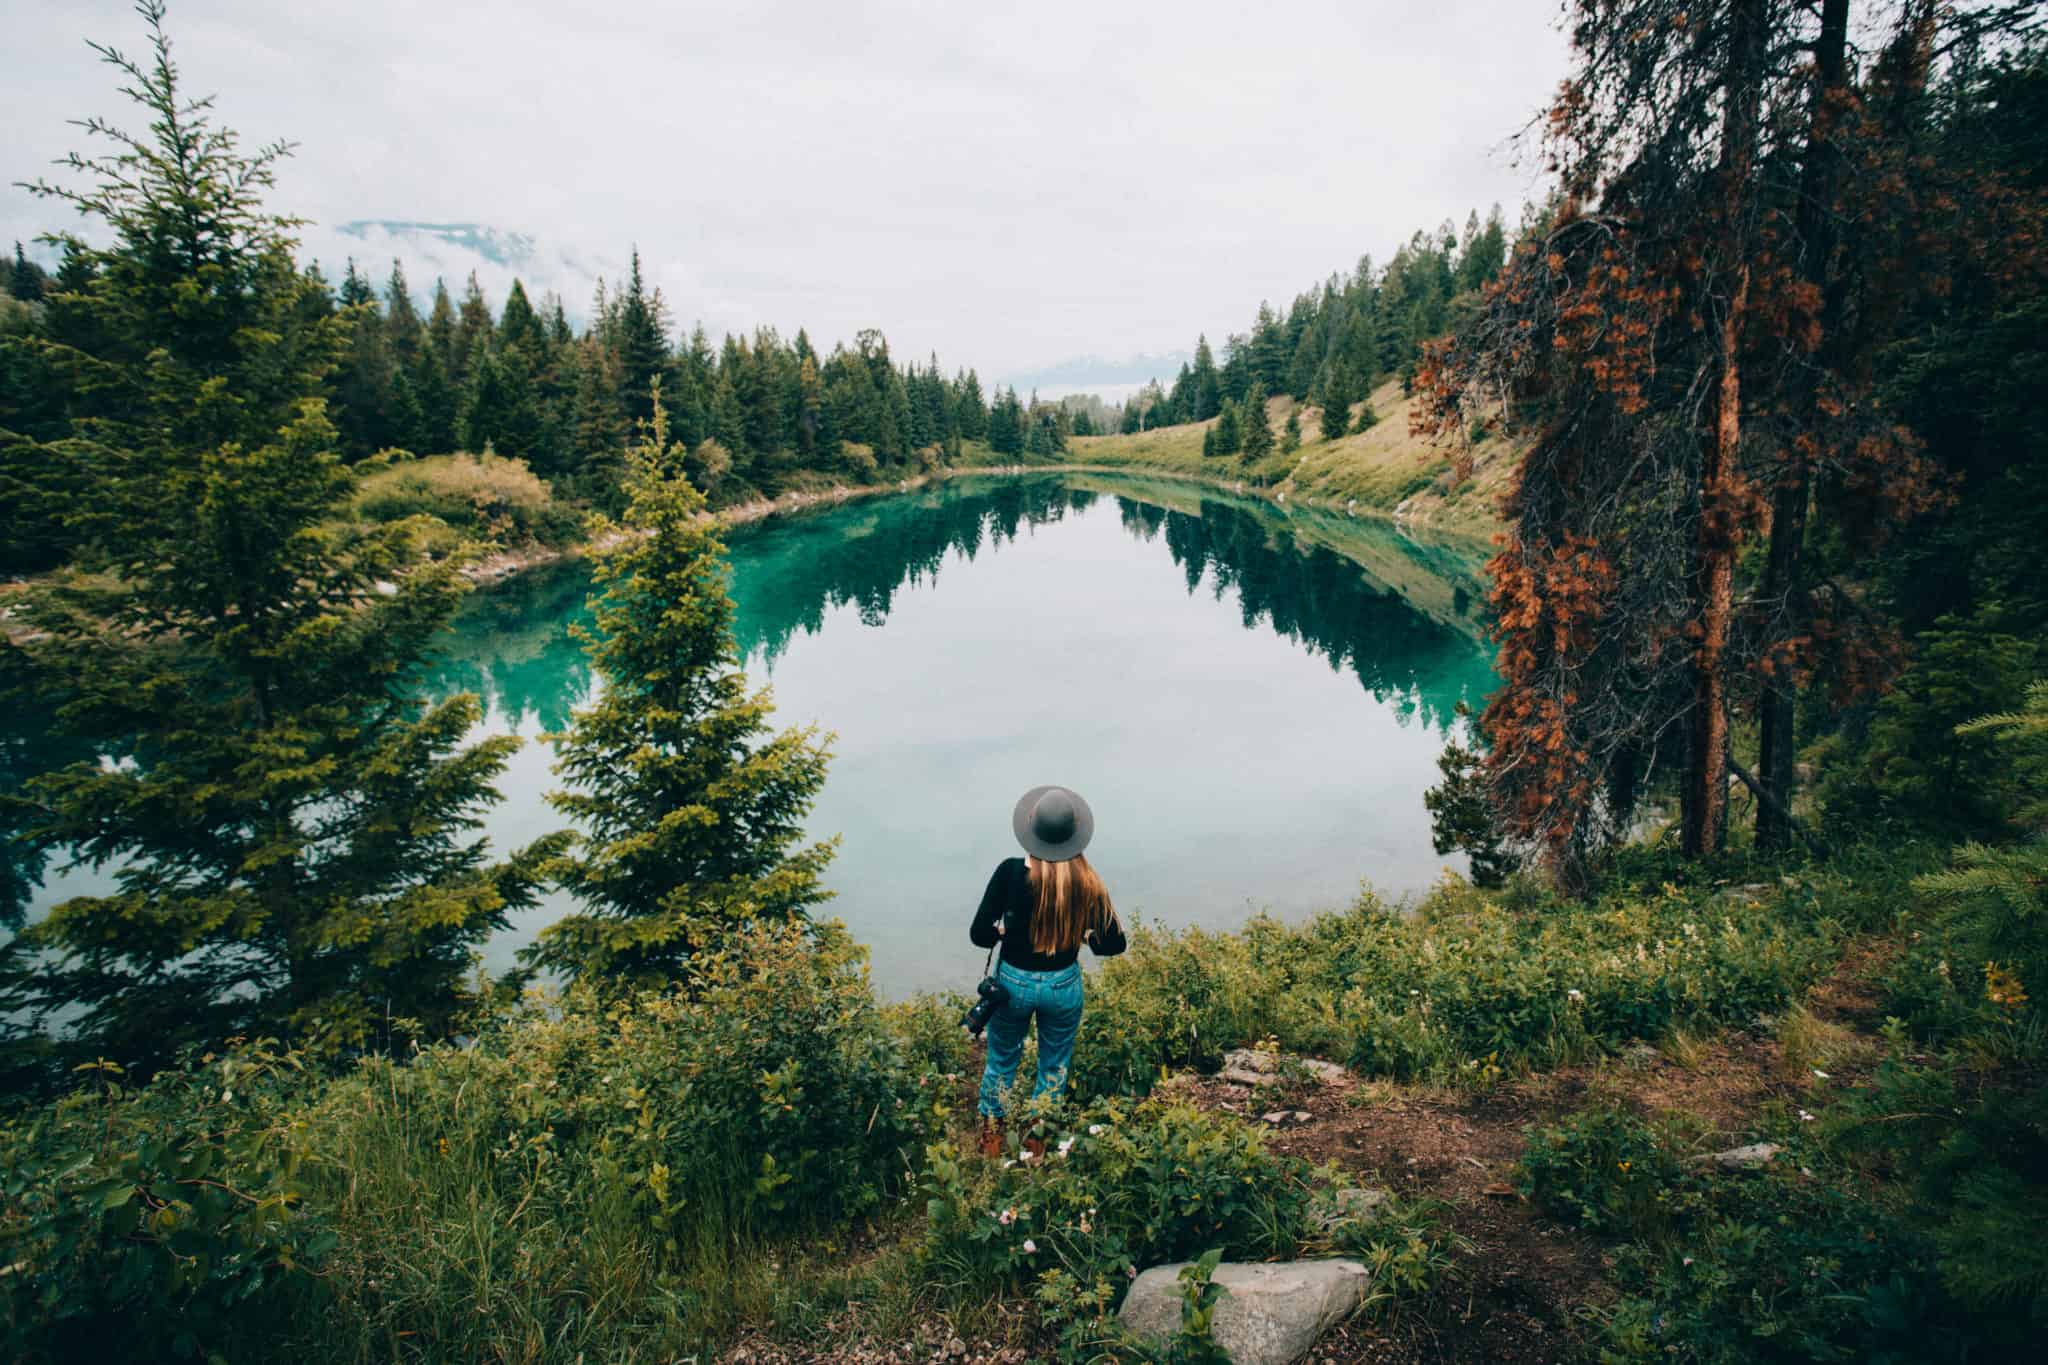 10 Easy Hikes In Jasper National Park To Introduce You To The Great Outdoors